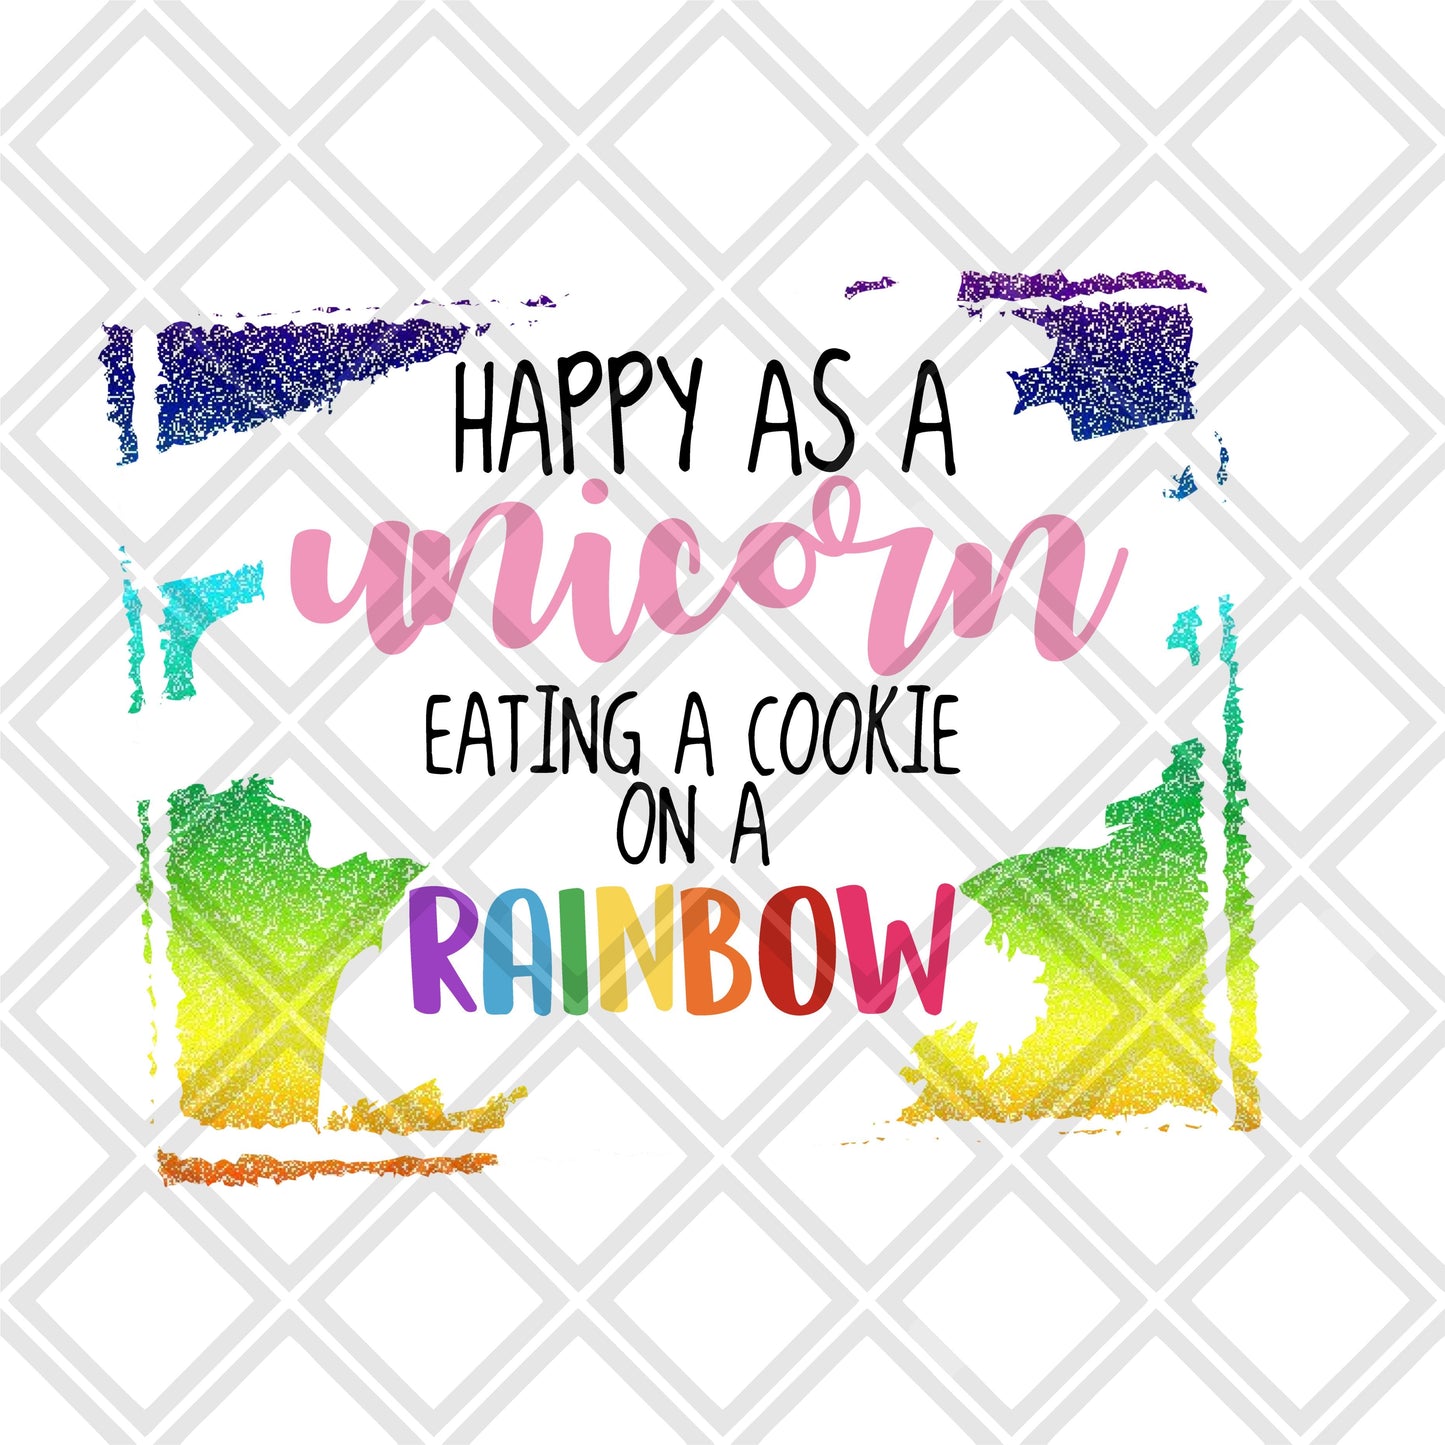 Happy as a unicorn eating a cookie on a Rainbow png Digital Download Instand Download